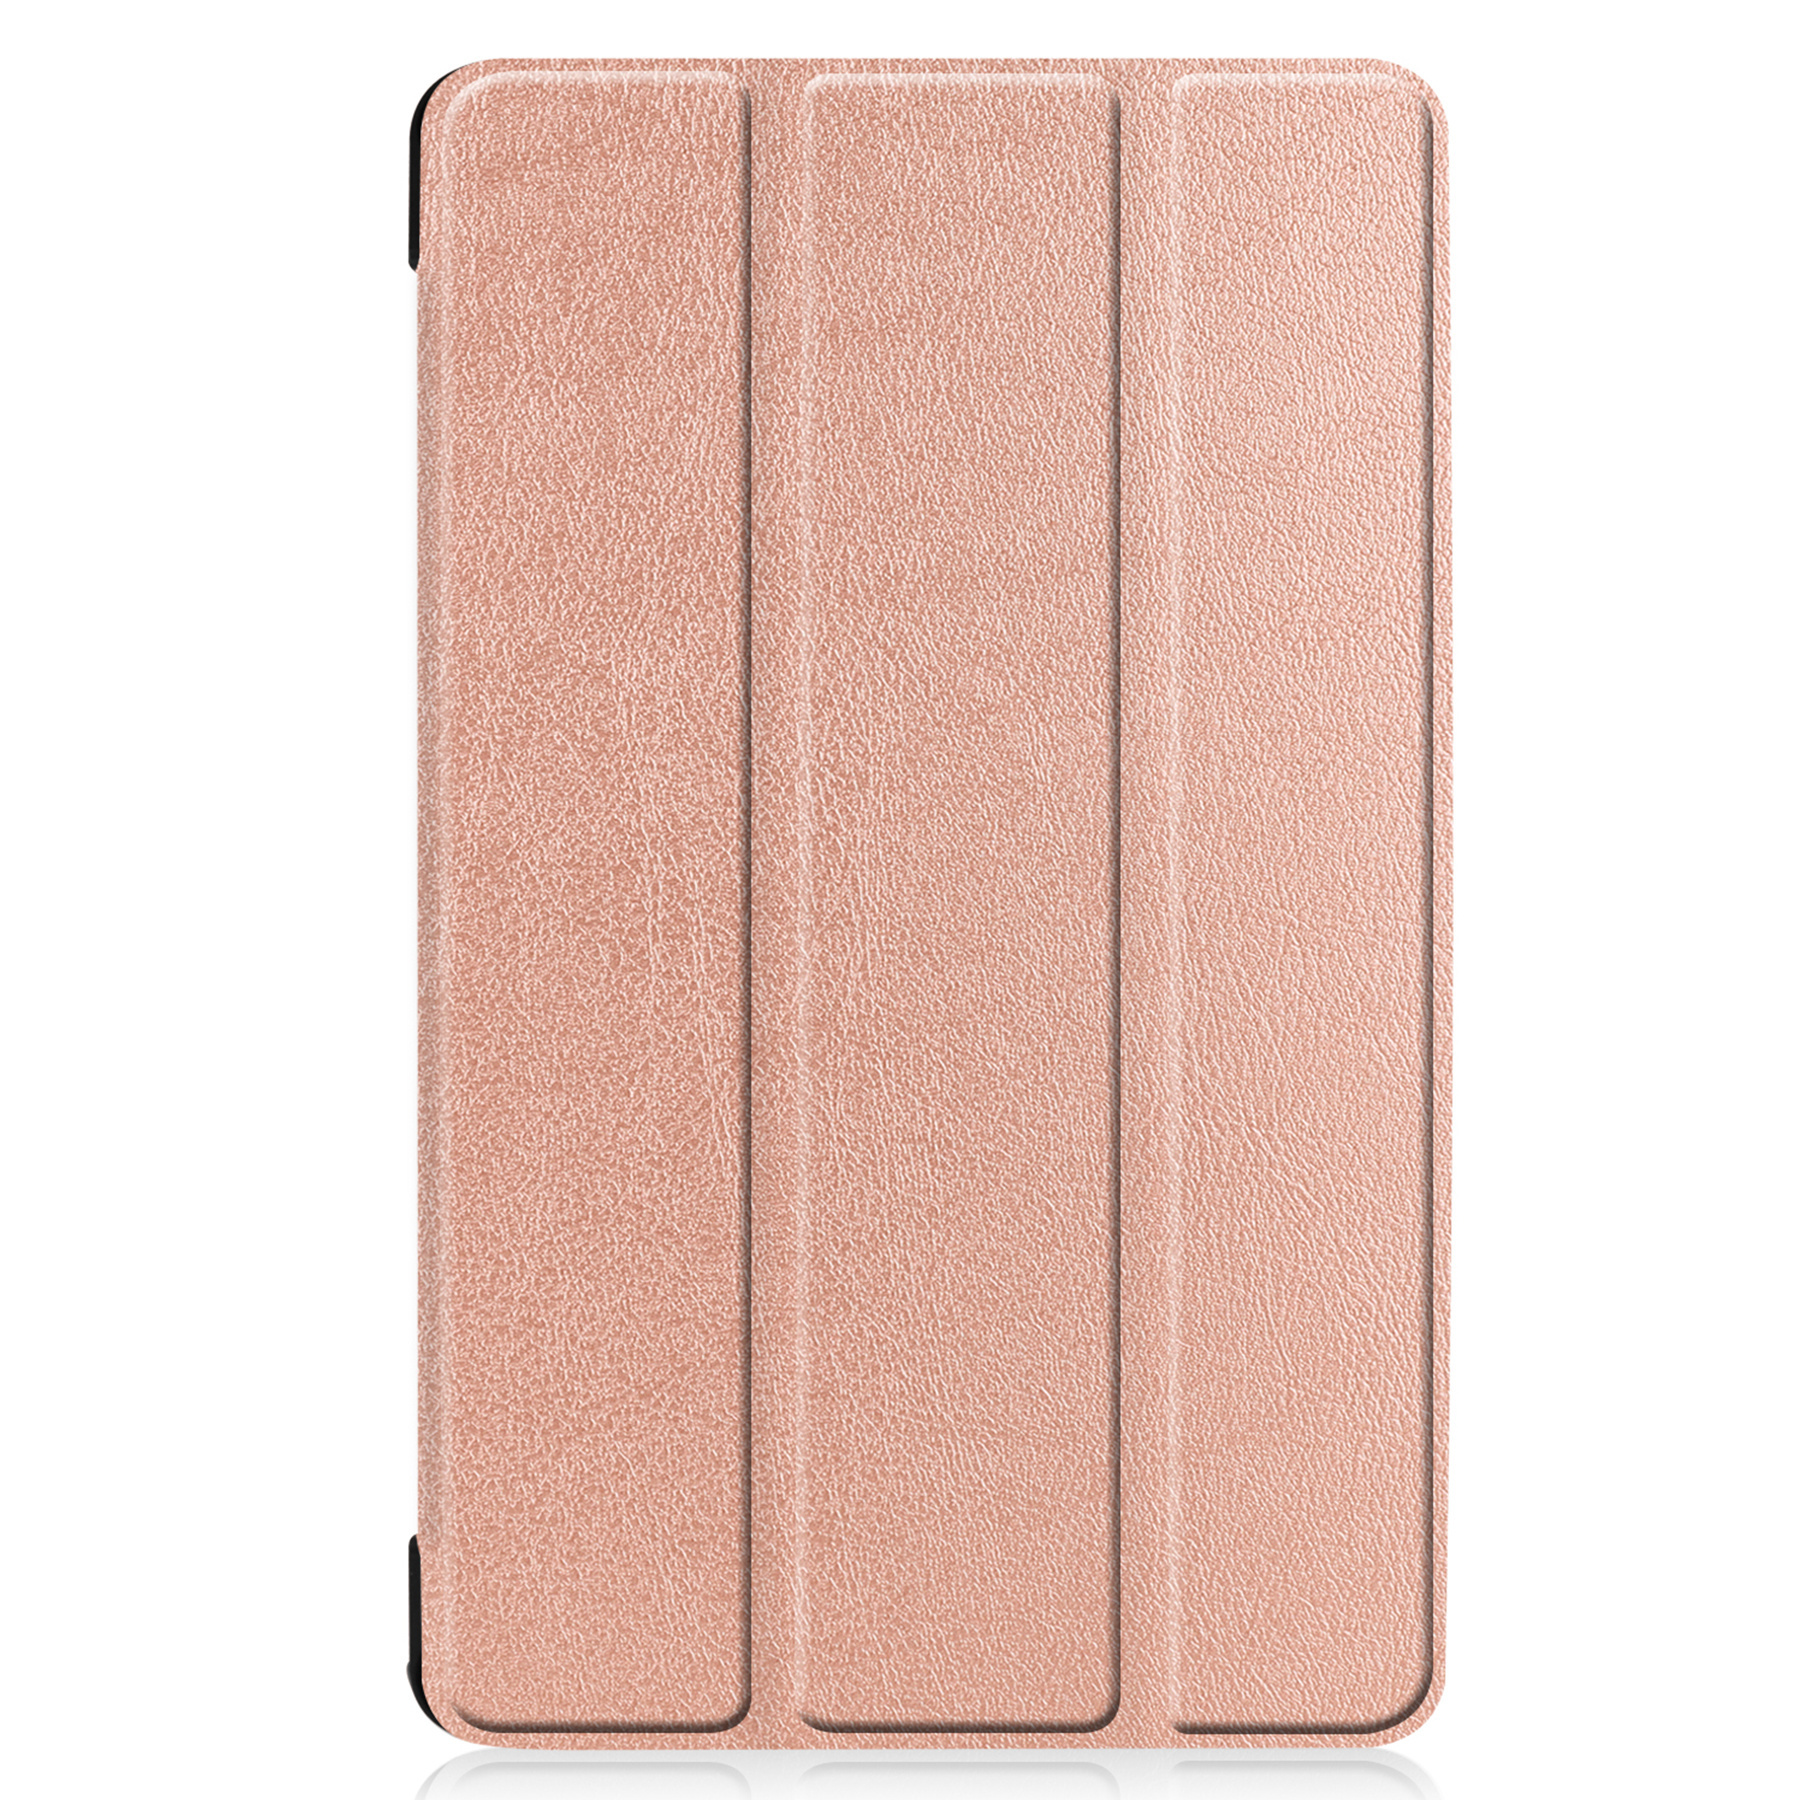 BASEY. Samsung Galaxy Tab A 8.0 2019 Hoes Book Case Luxe Hoesje Met Screenprotector - Samsung Galaxy Tab A 8.0 (2019) Hoesje Book Case Hoes - Rosé Goud